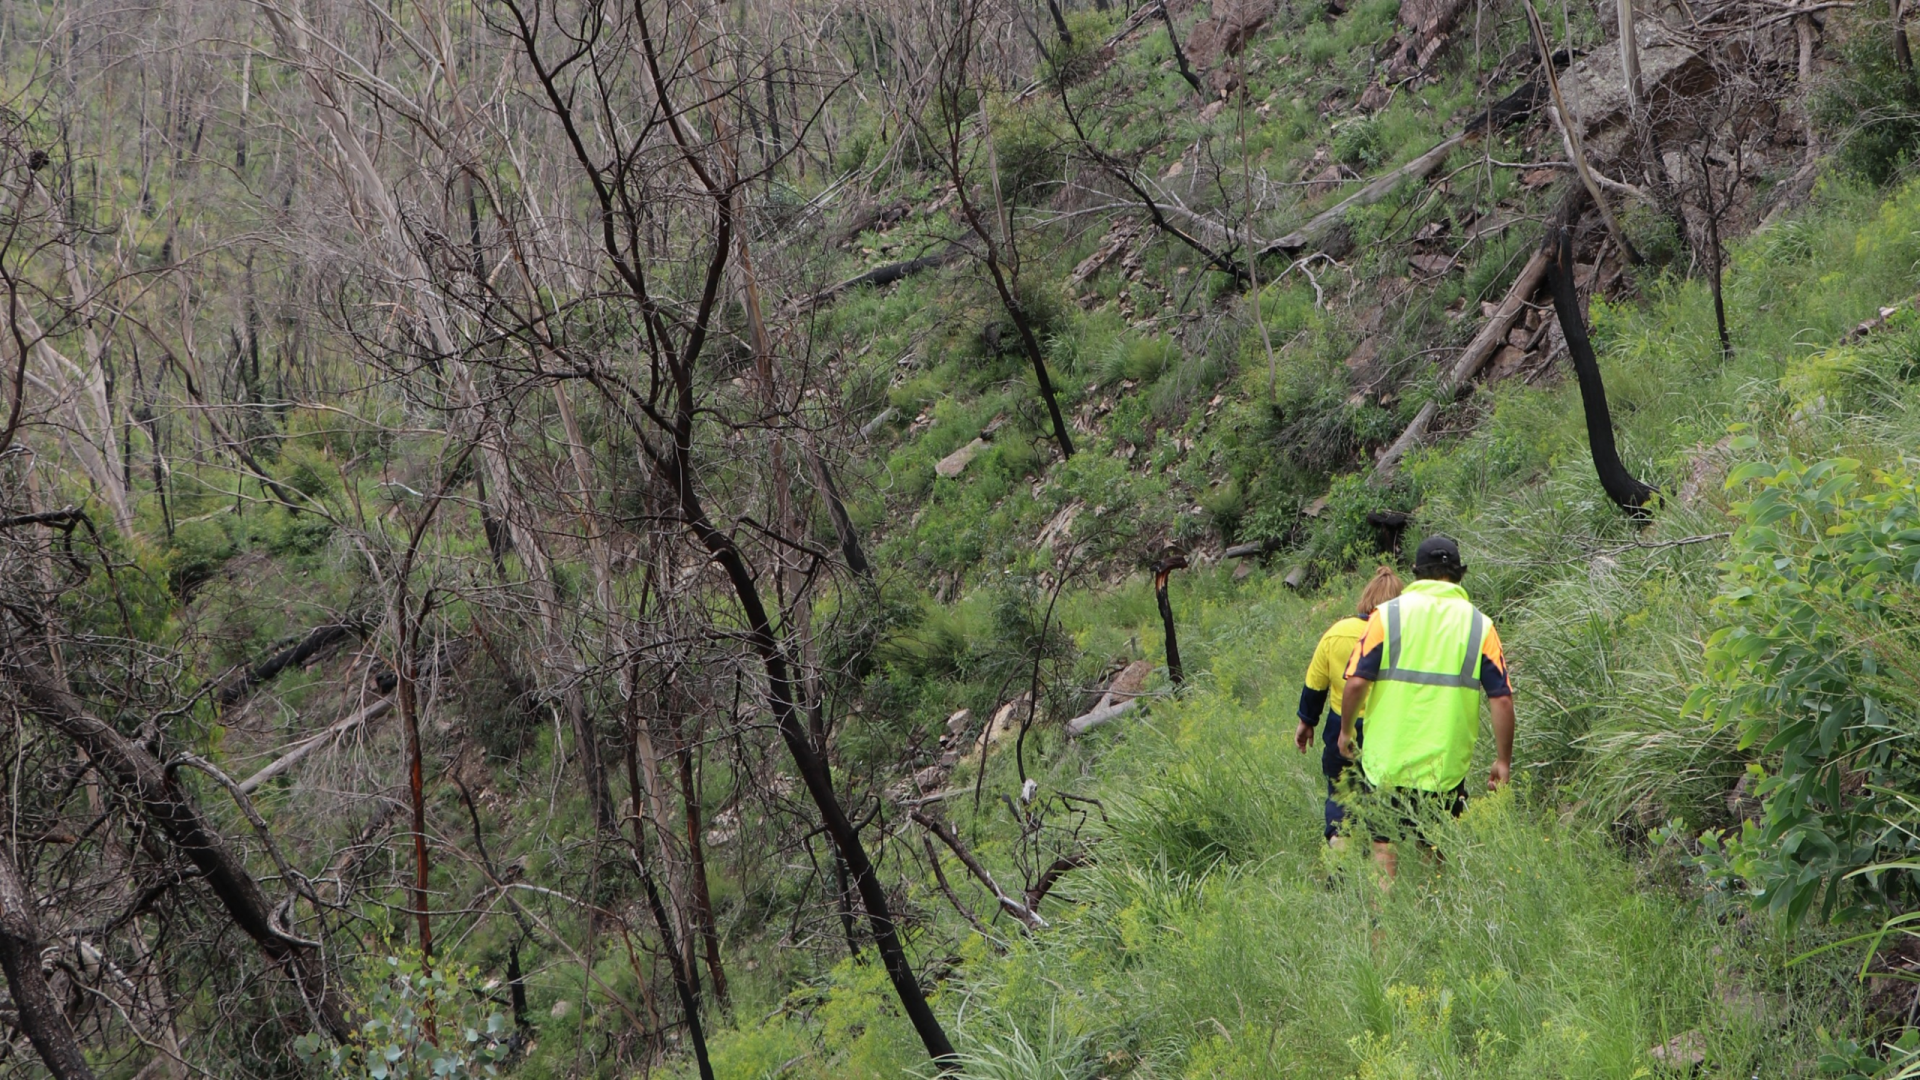 Image of a sloped forested hillside. there is green growth on the ground but the trees are dark and bare of leaves. There is a person in a hi visibility vest facing away from the camera.